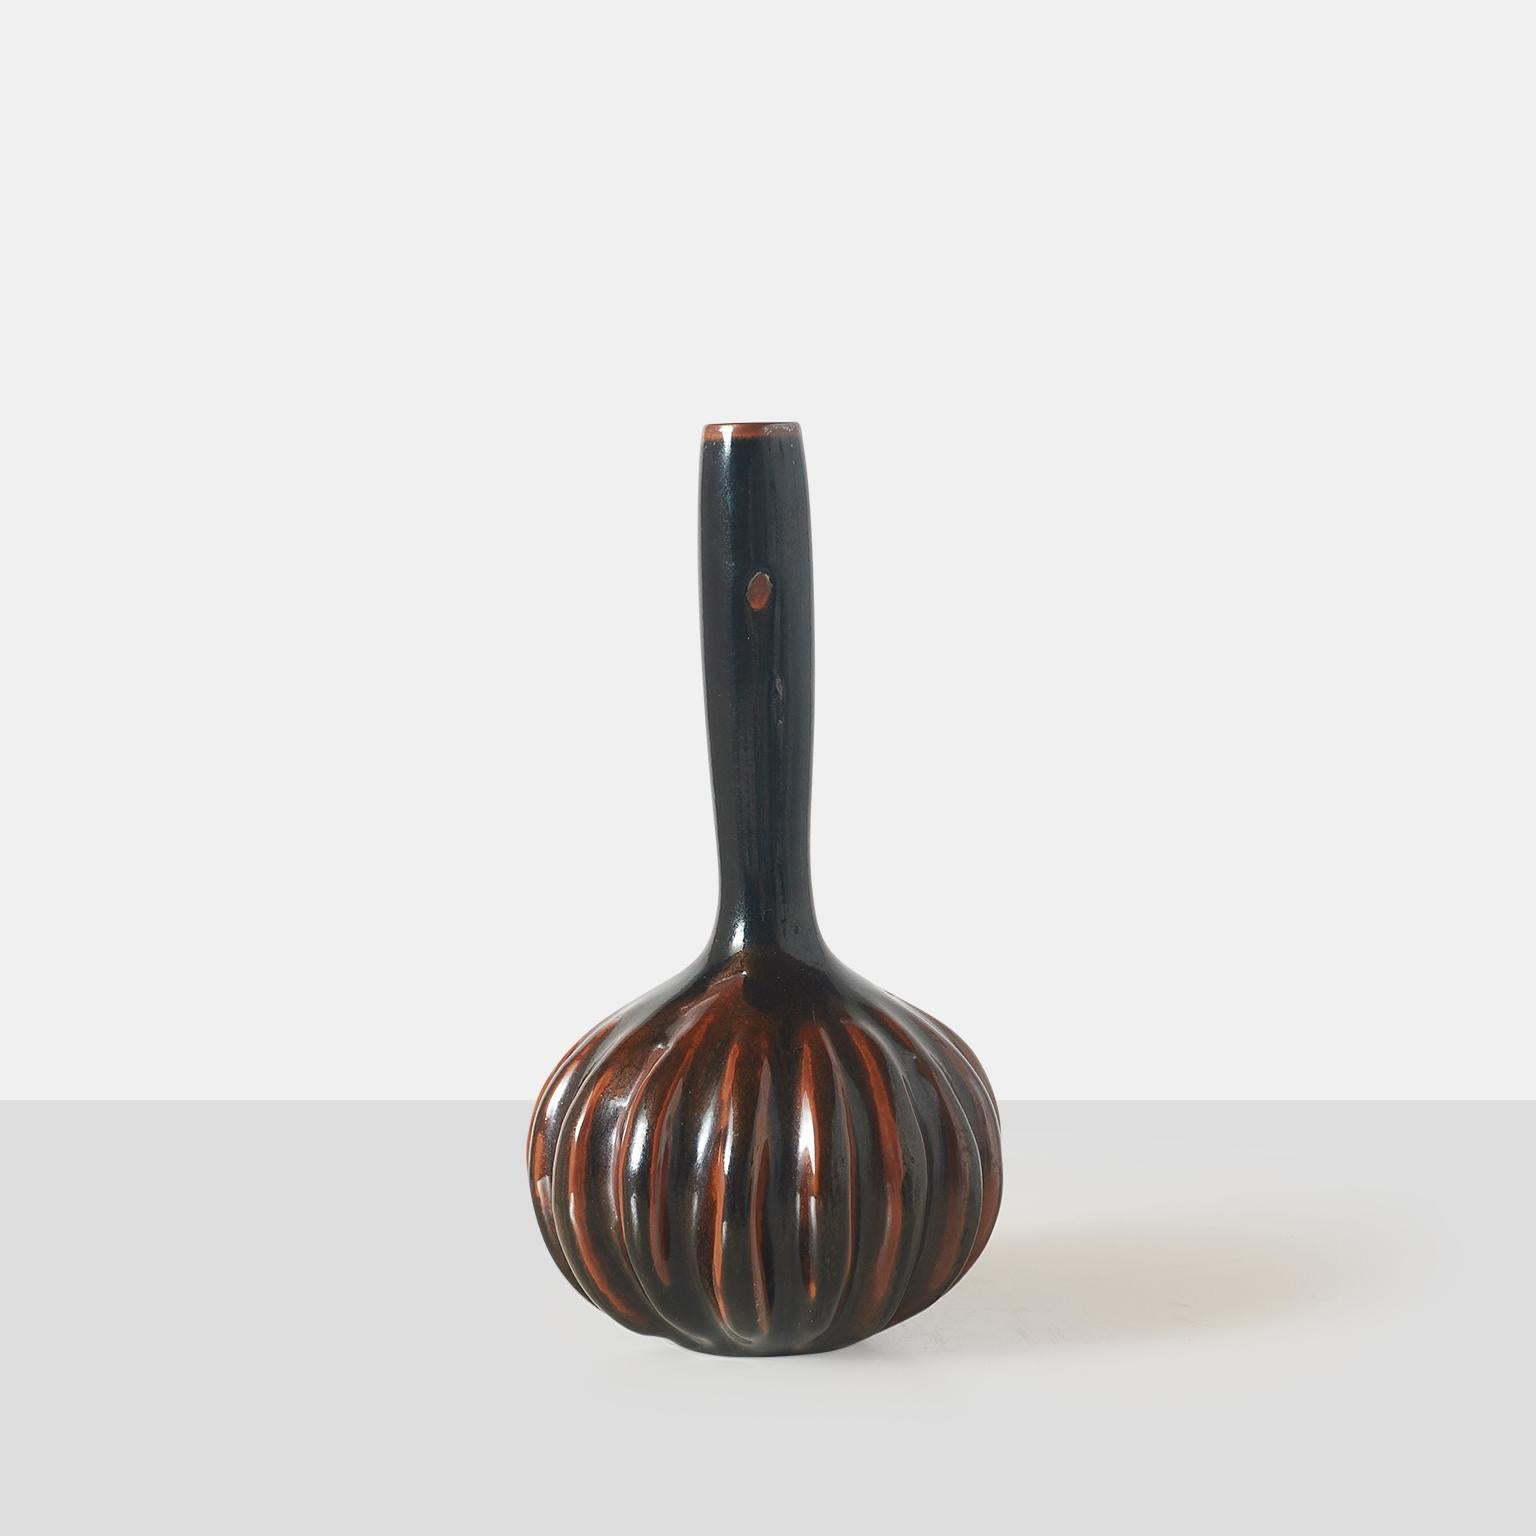 A stoneware vase by Axel Salto for Royal Copenhagen with a long slim neck and fluted base and decorated with a deep red and brown olivine glaze. Signed SALTO on the base.